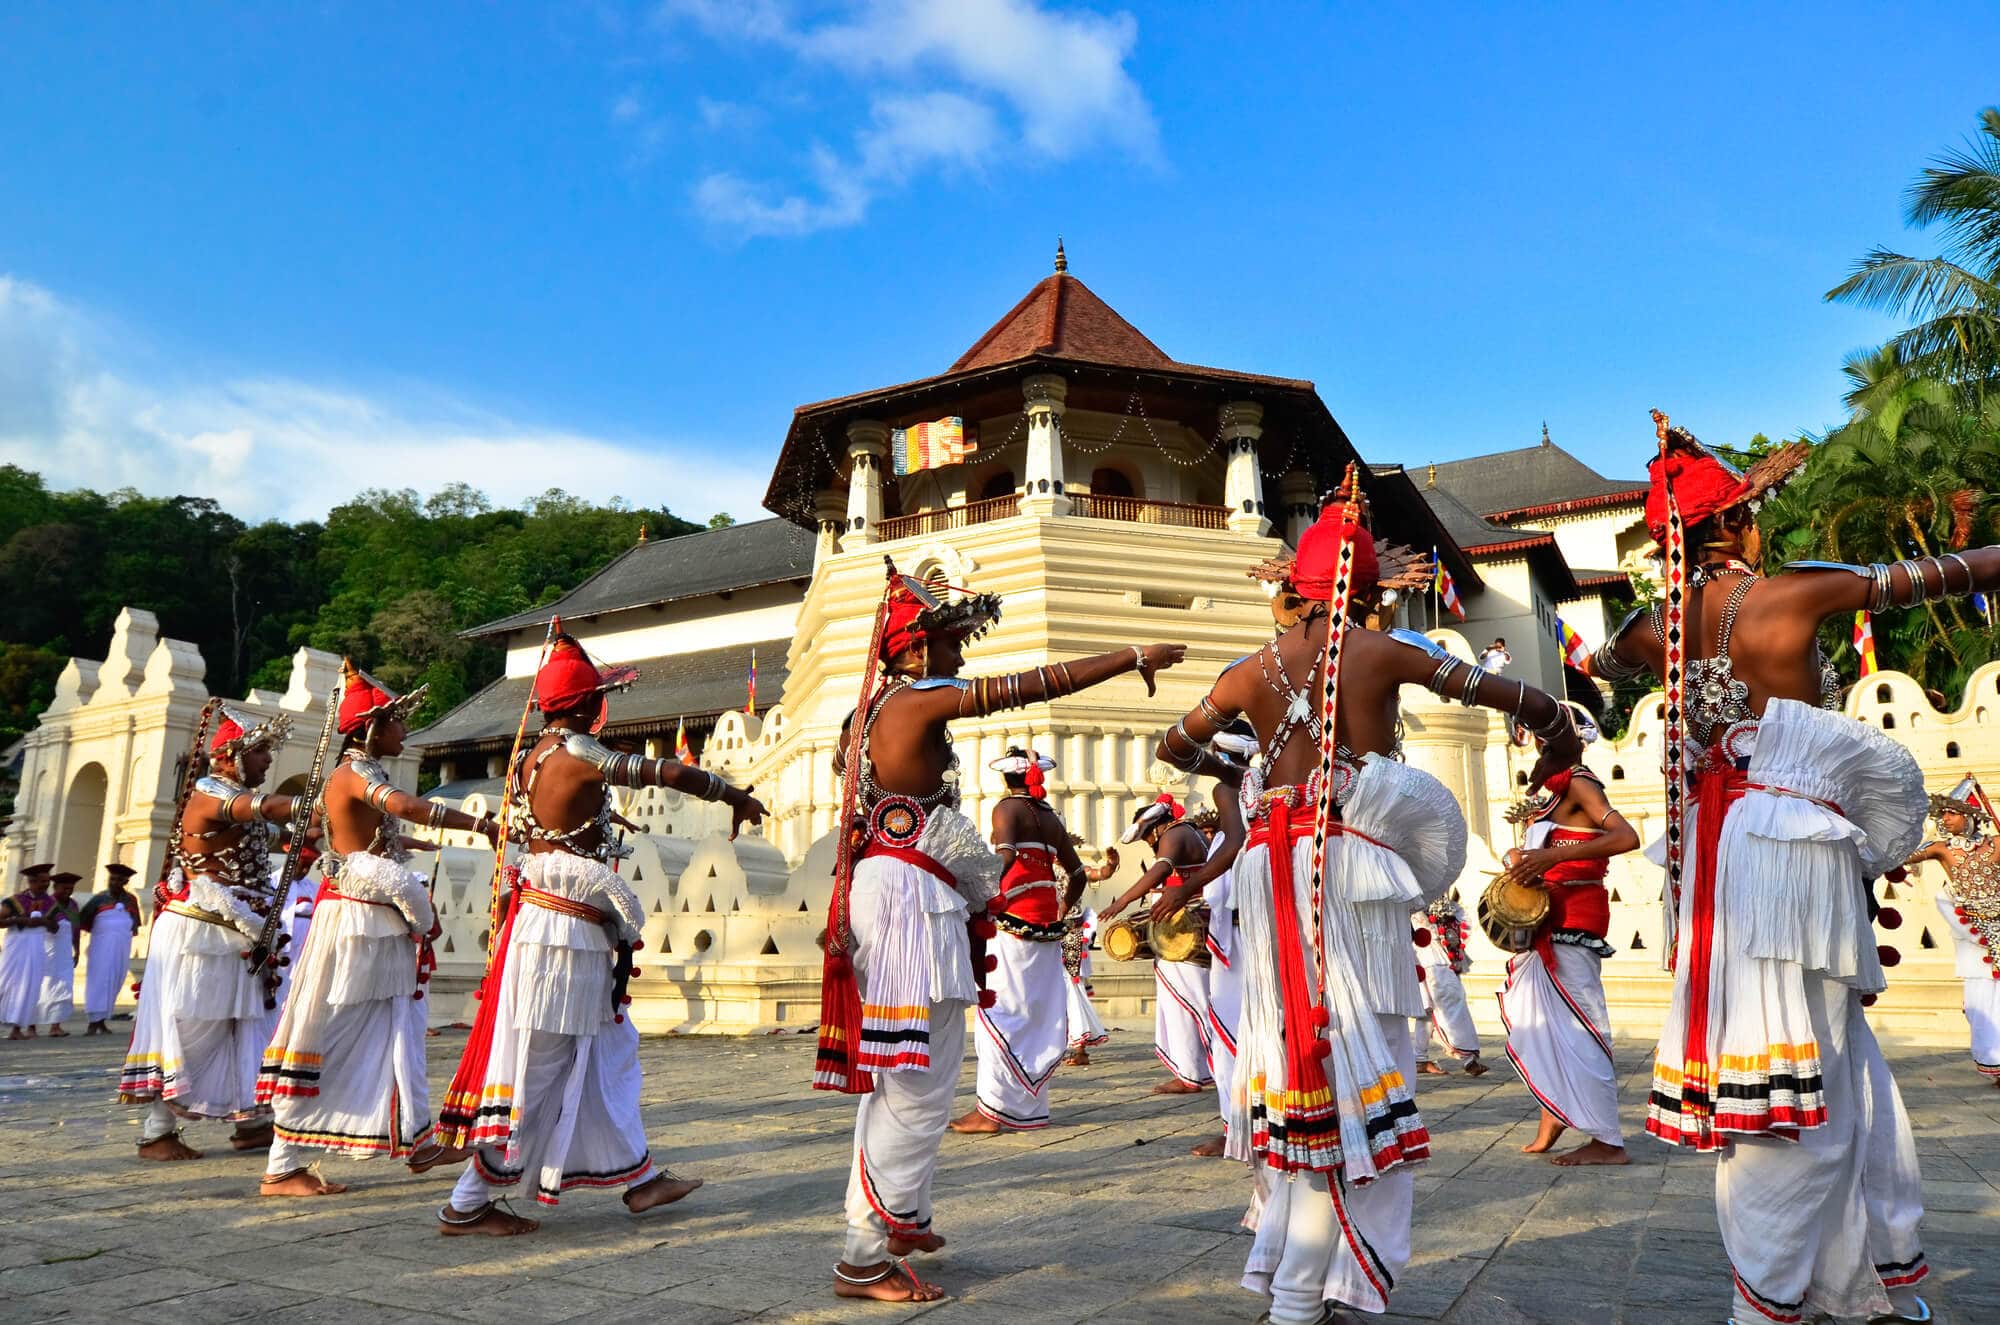 Men wearing white costumes with red hats and jewelry dancing traditional Kandyan Dance outside Temple of the Tooth, one of the best things to see in Kandy.